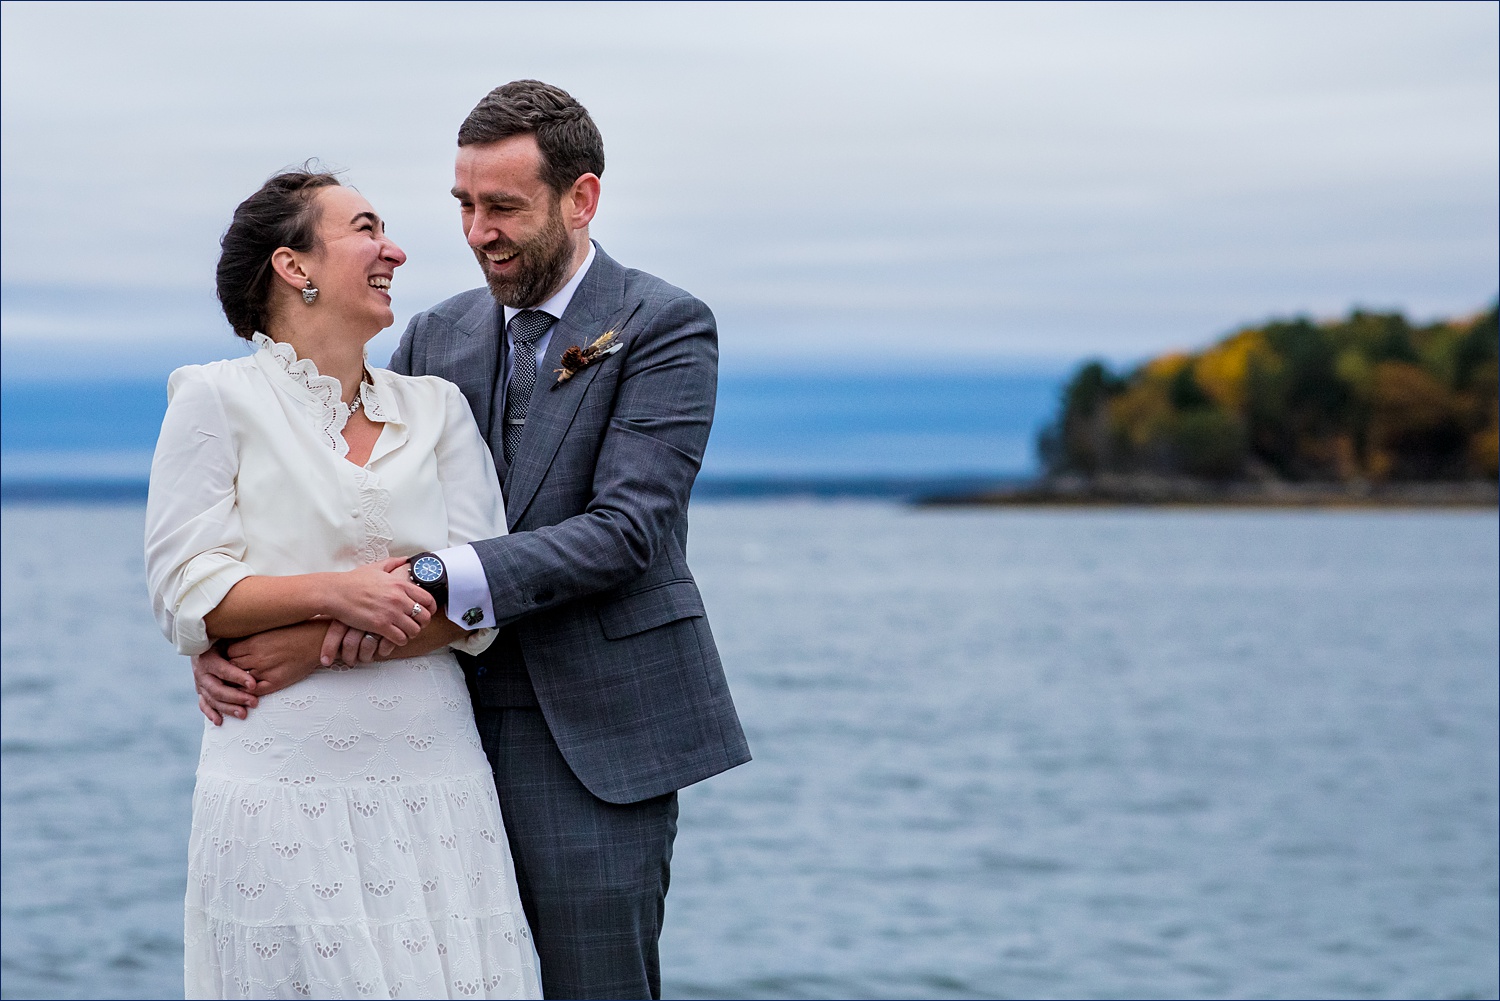 The bride and groom at their College of the Atlantic wedding day in Maine are all smiles